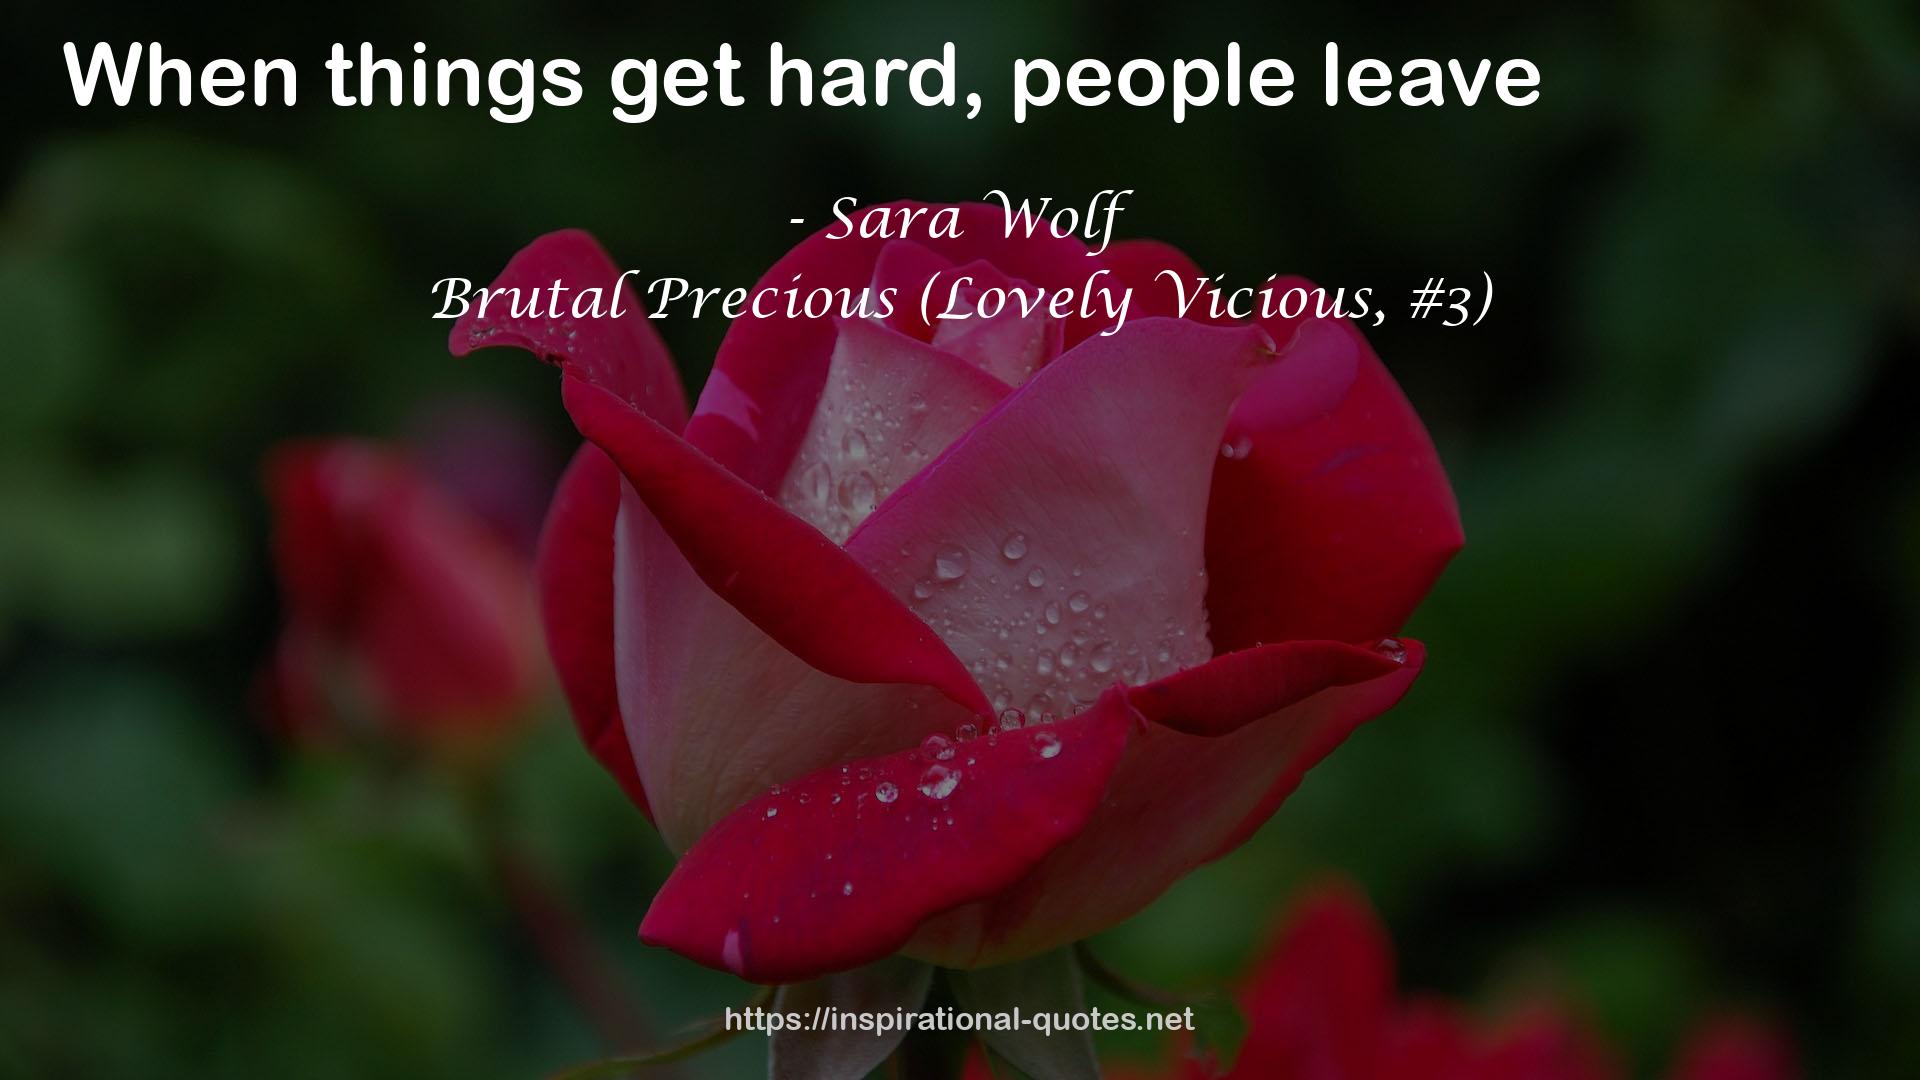 Brutal Precious (Lovely Vicious, #3) QUOTES